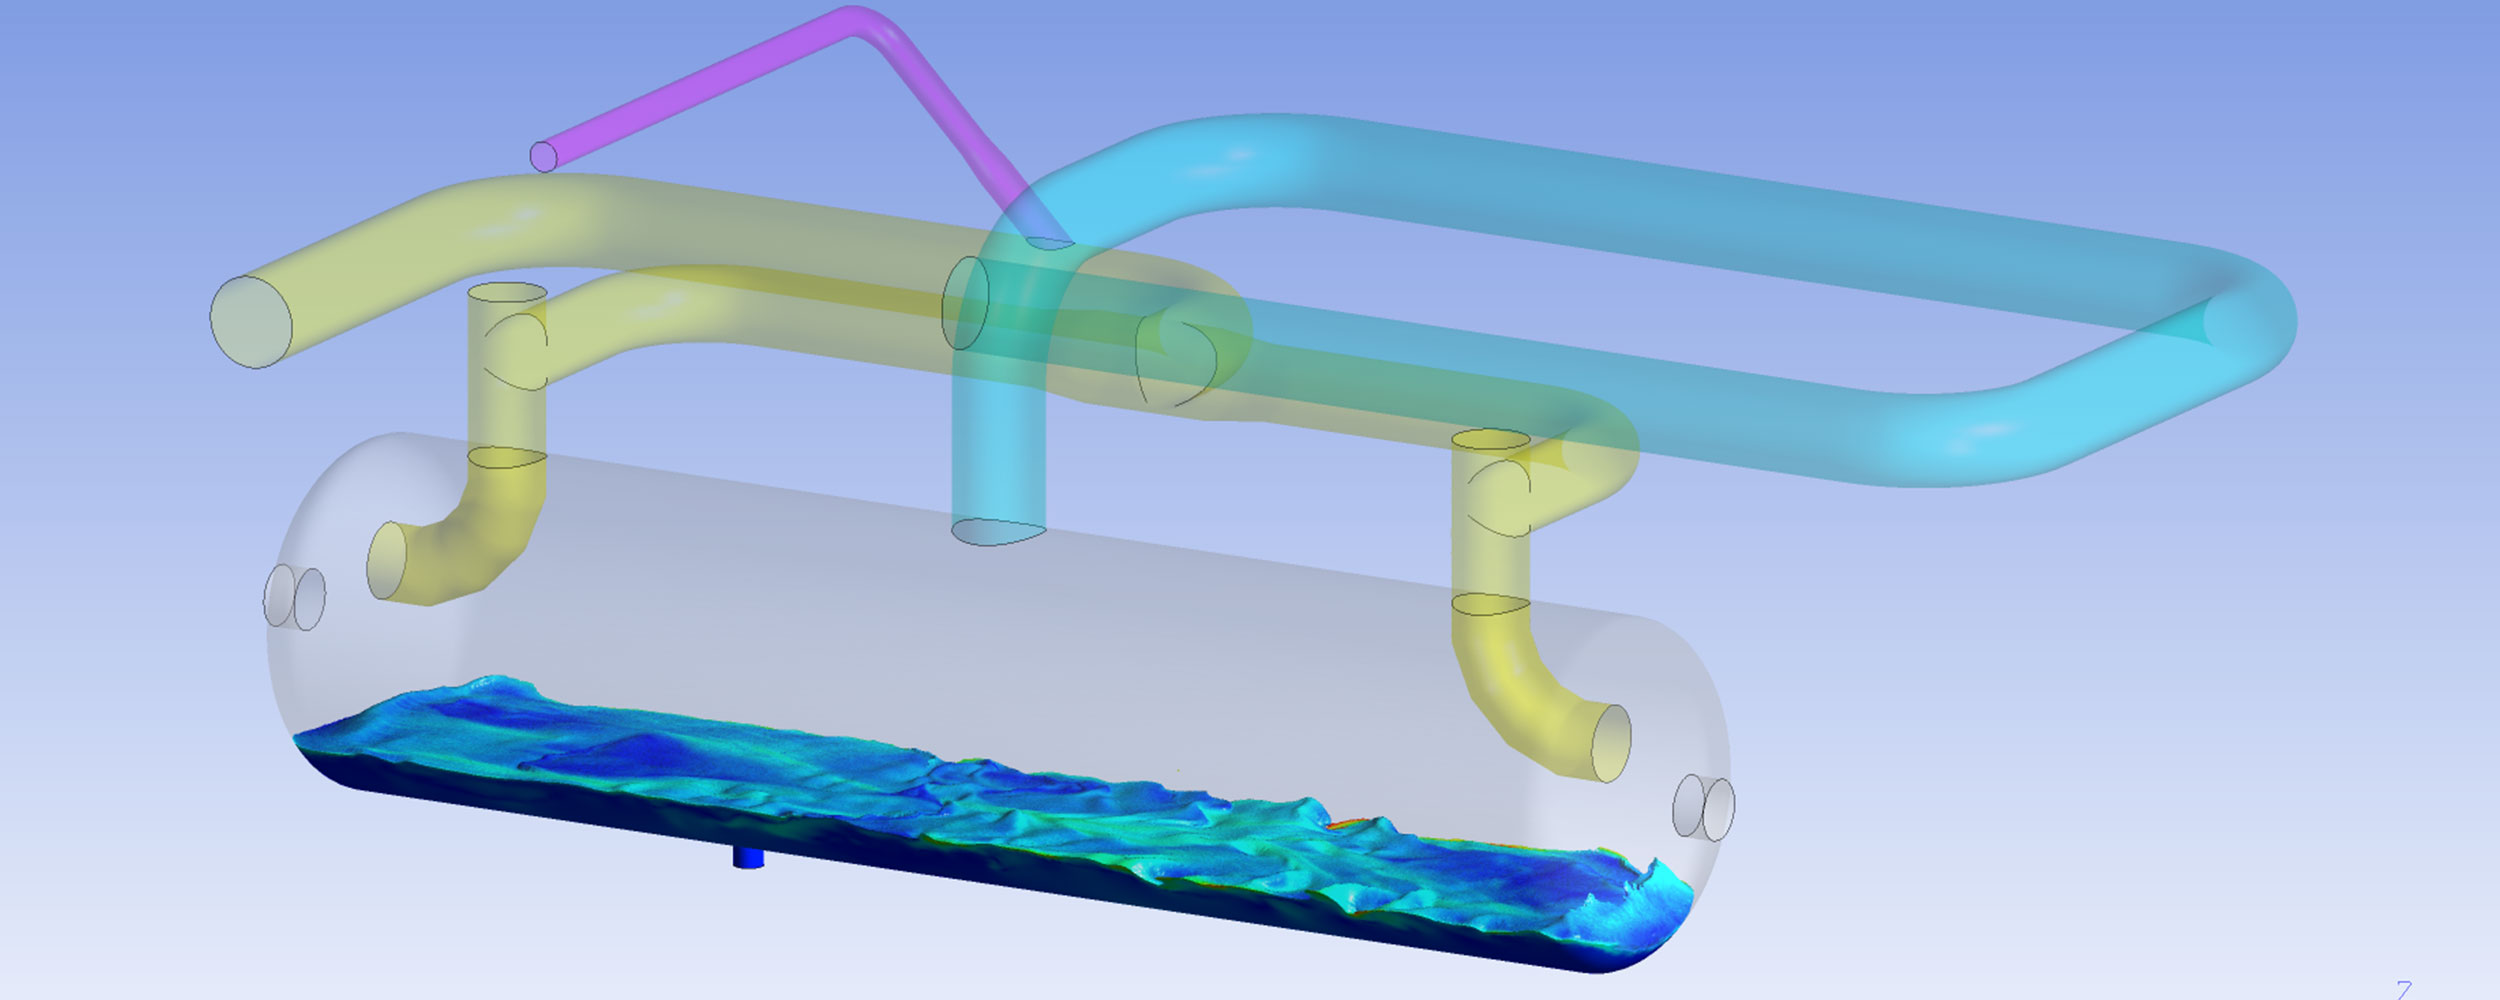 Computation fluid dynamic model of knock-out drum